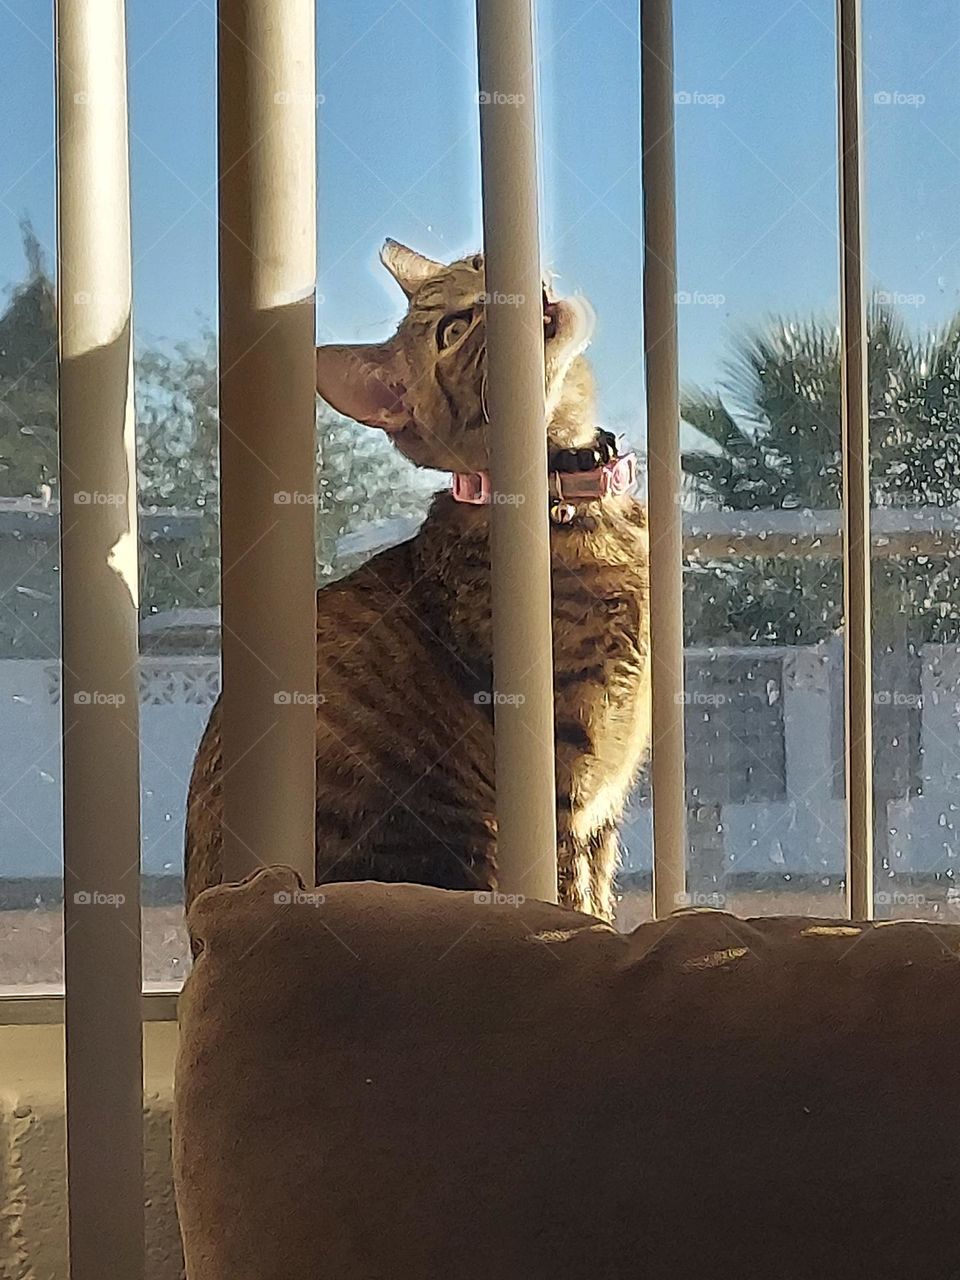 biting the blinds